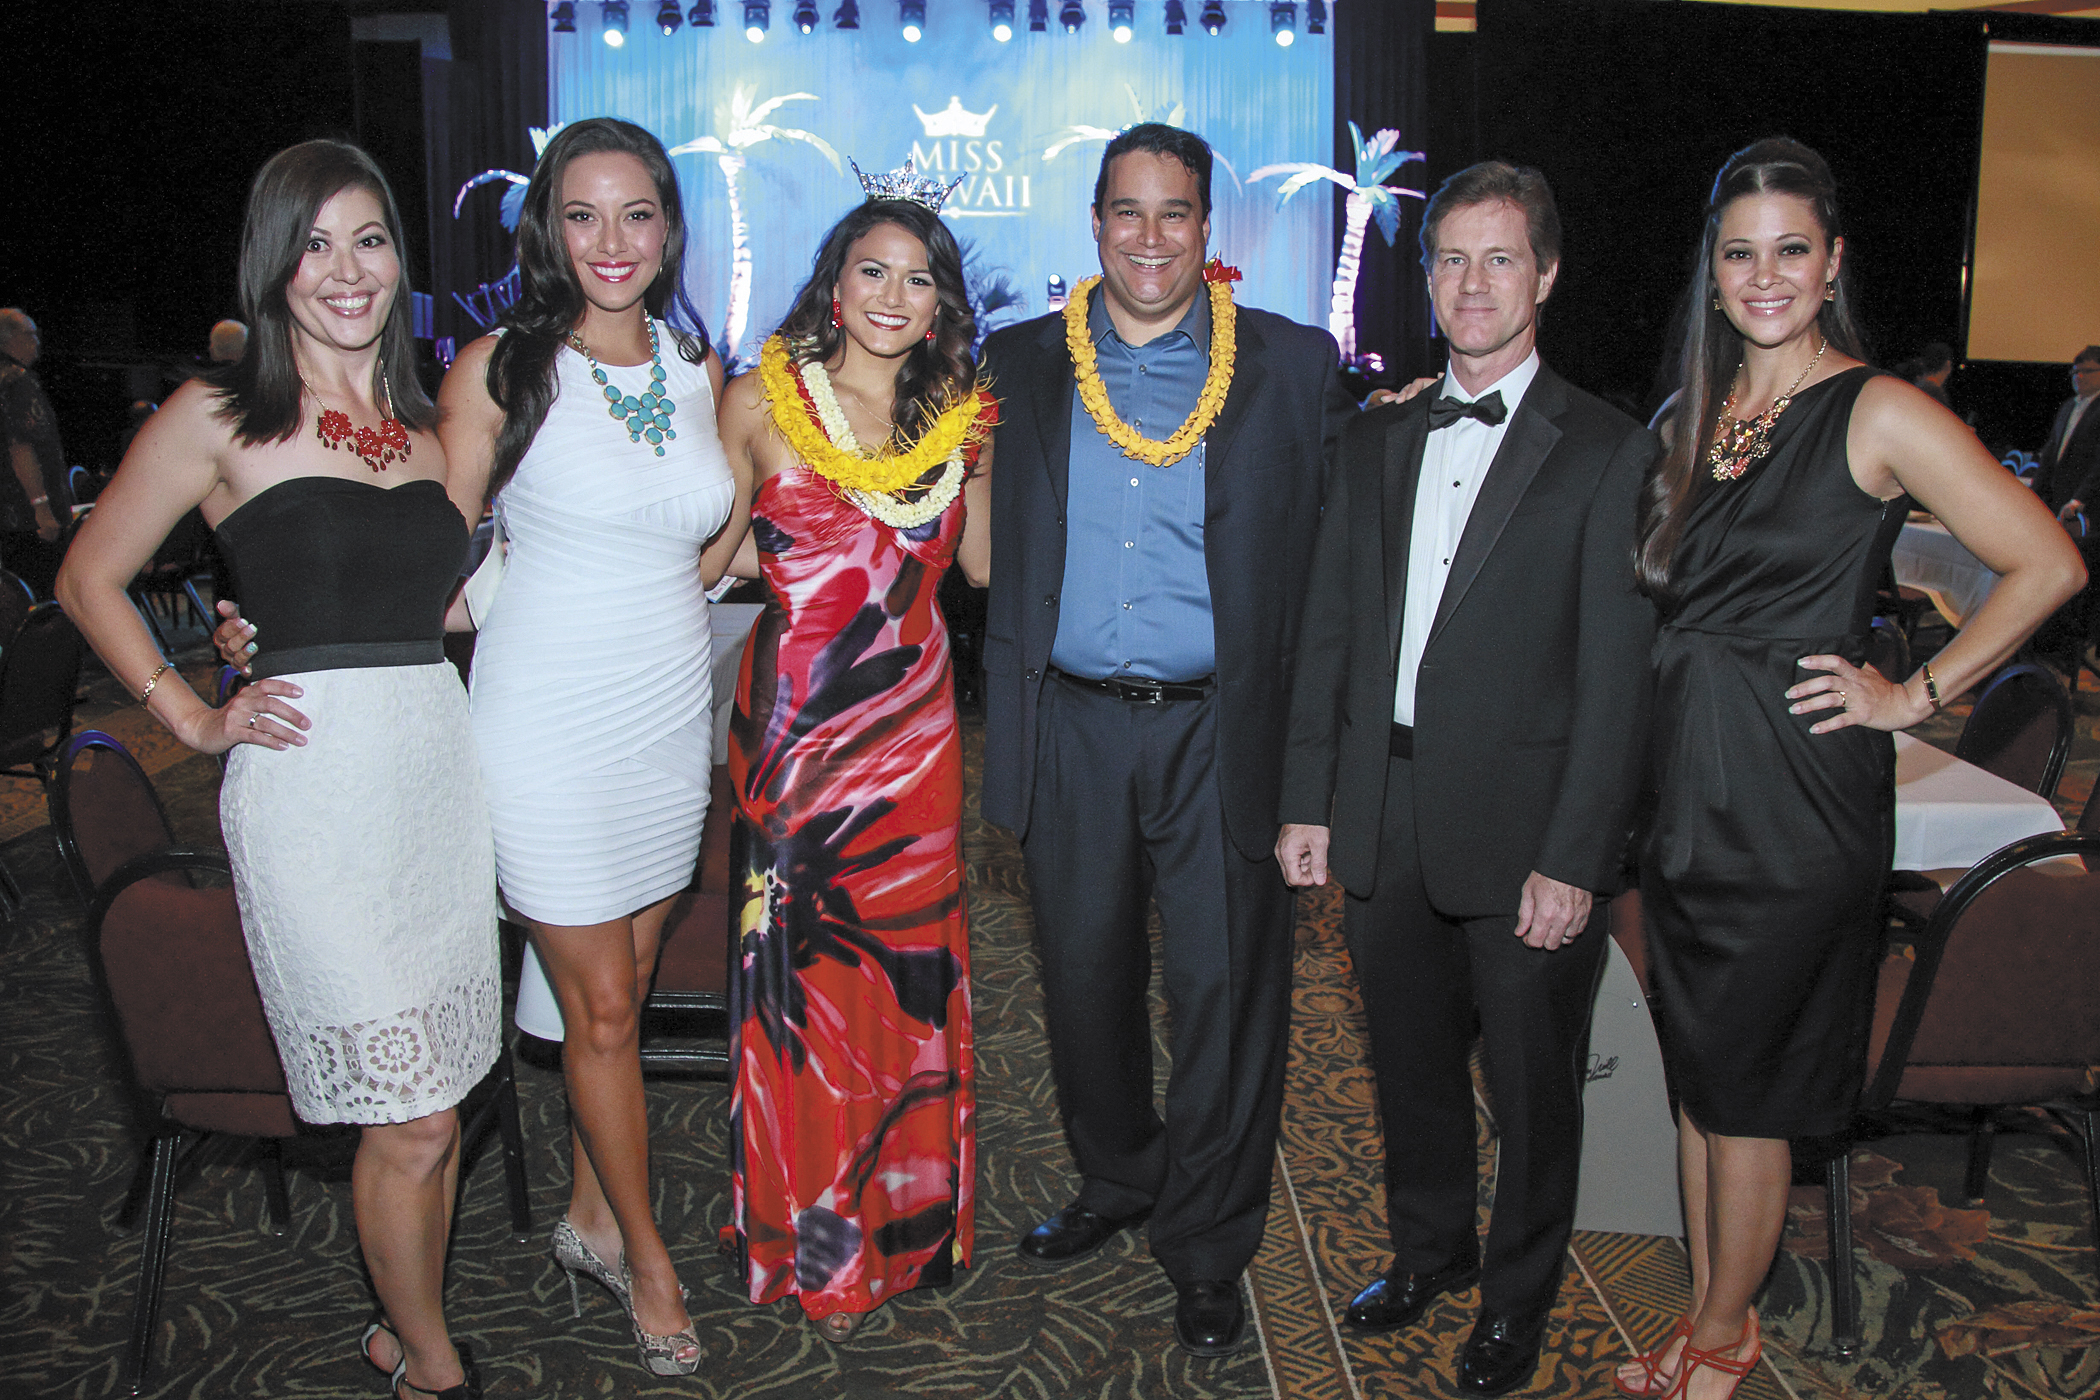 Miss Hawaii Scholarship Pageant